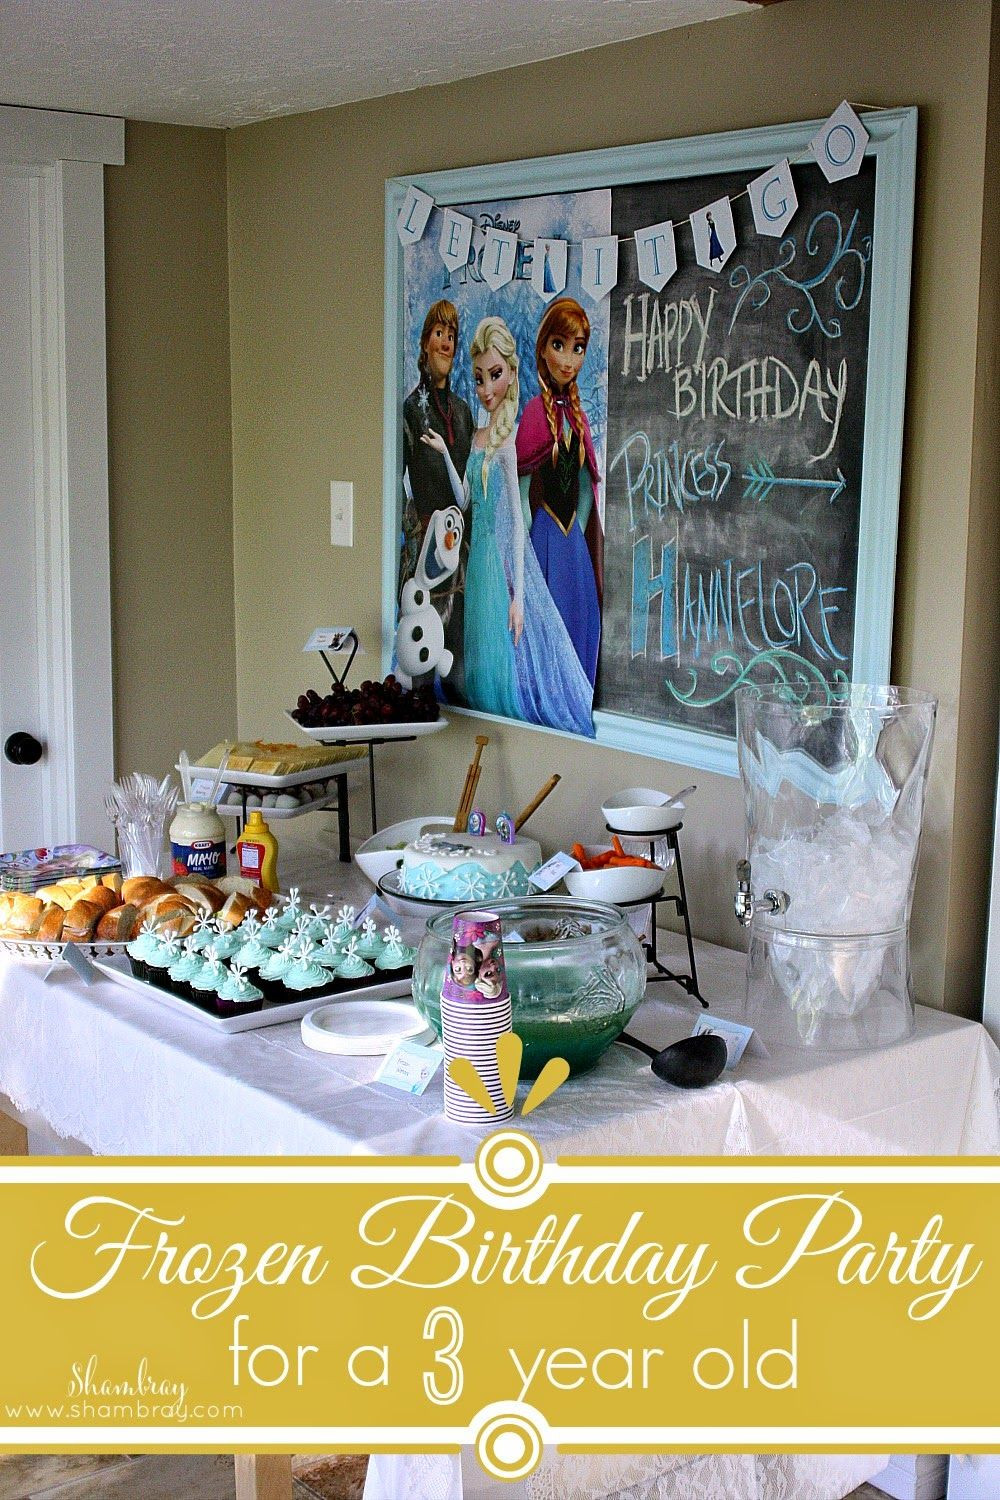 4 Year Old Little Girl Birthday Party Ideas
 A Frozen Birthday Party for a 3 year old